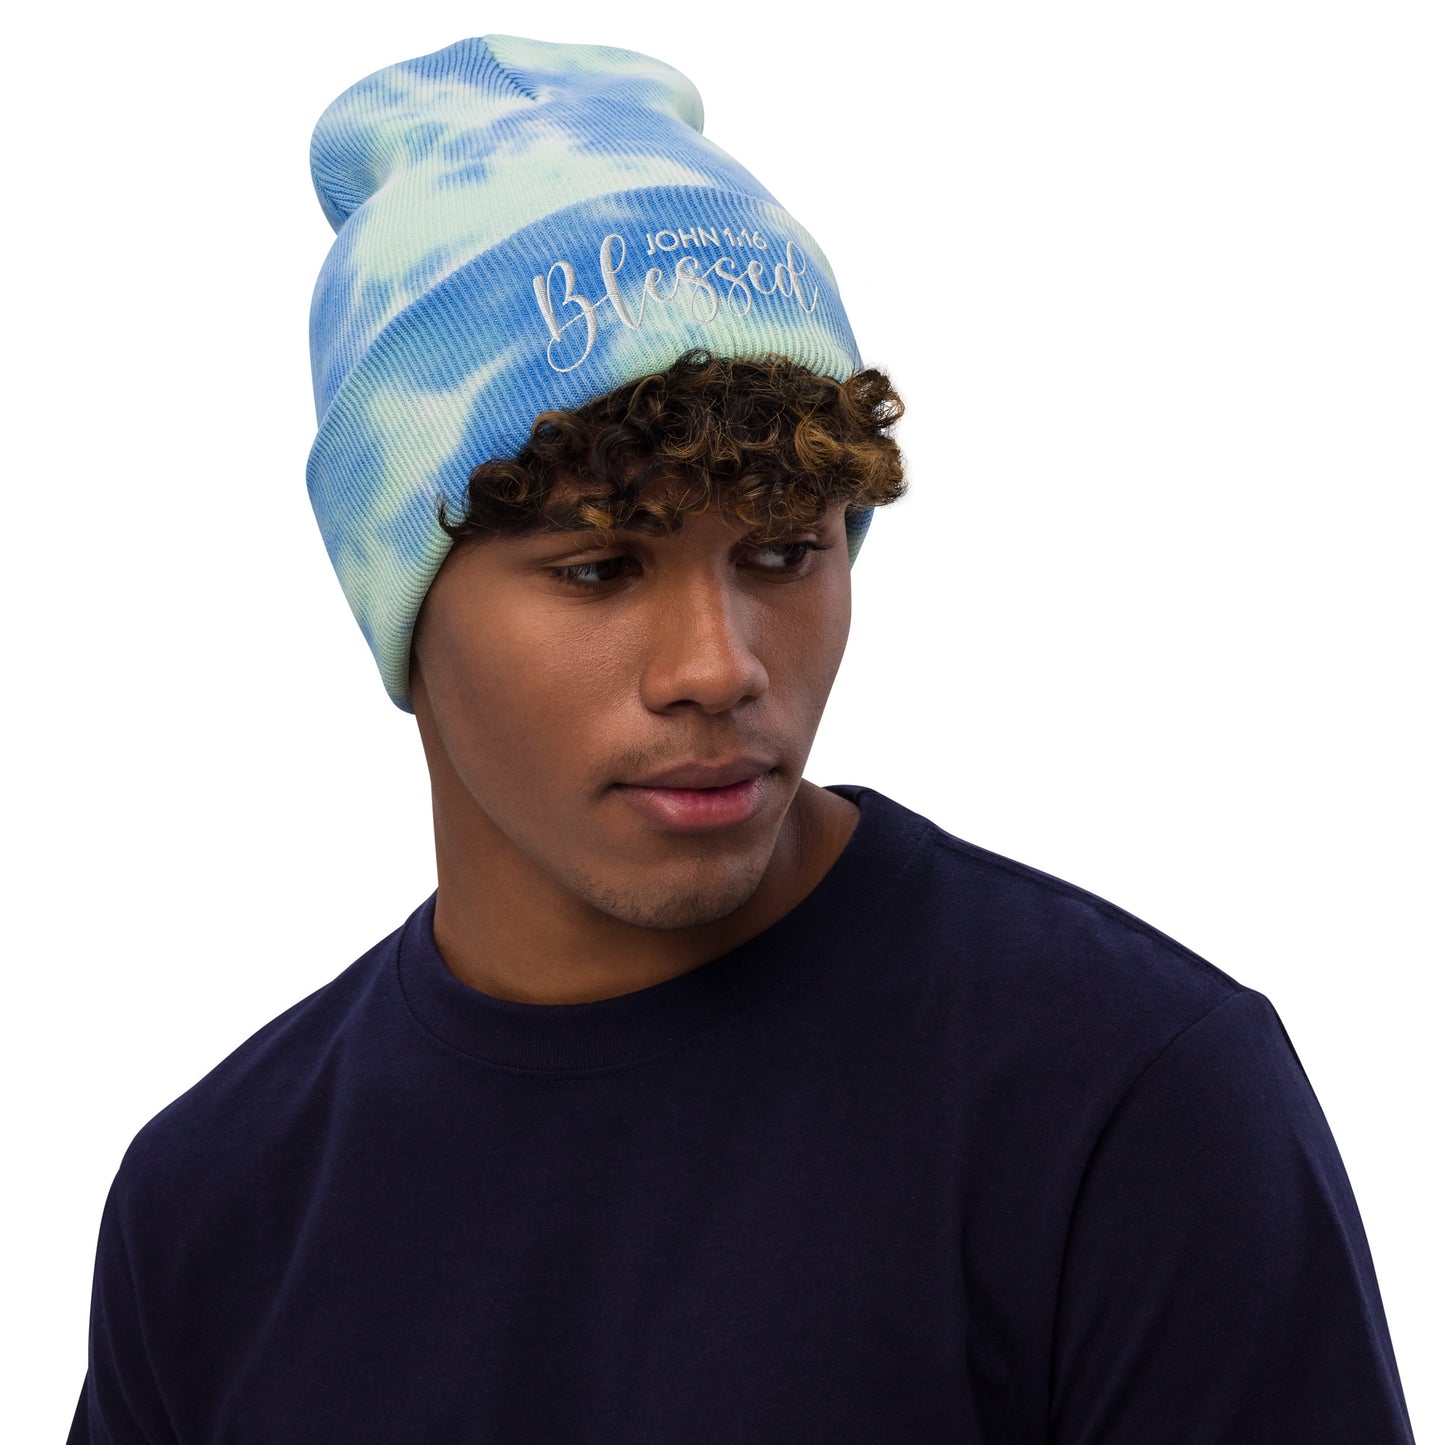 Blessed Embroidered Tie-Dye Beanie (Unisex) - Humble & Faithful Co.